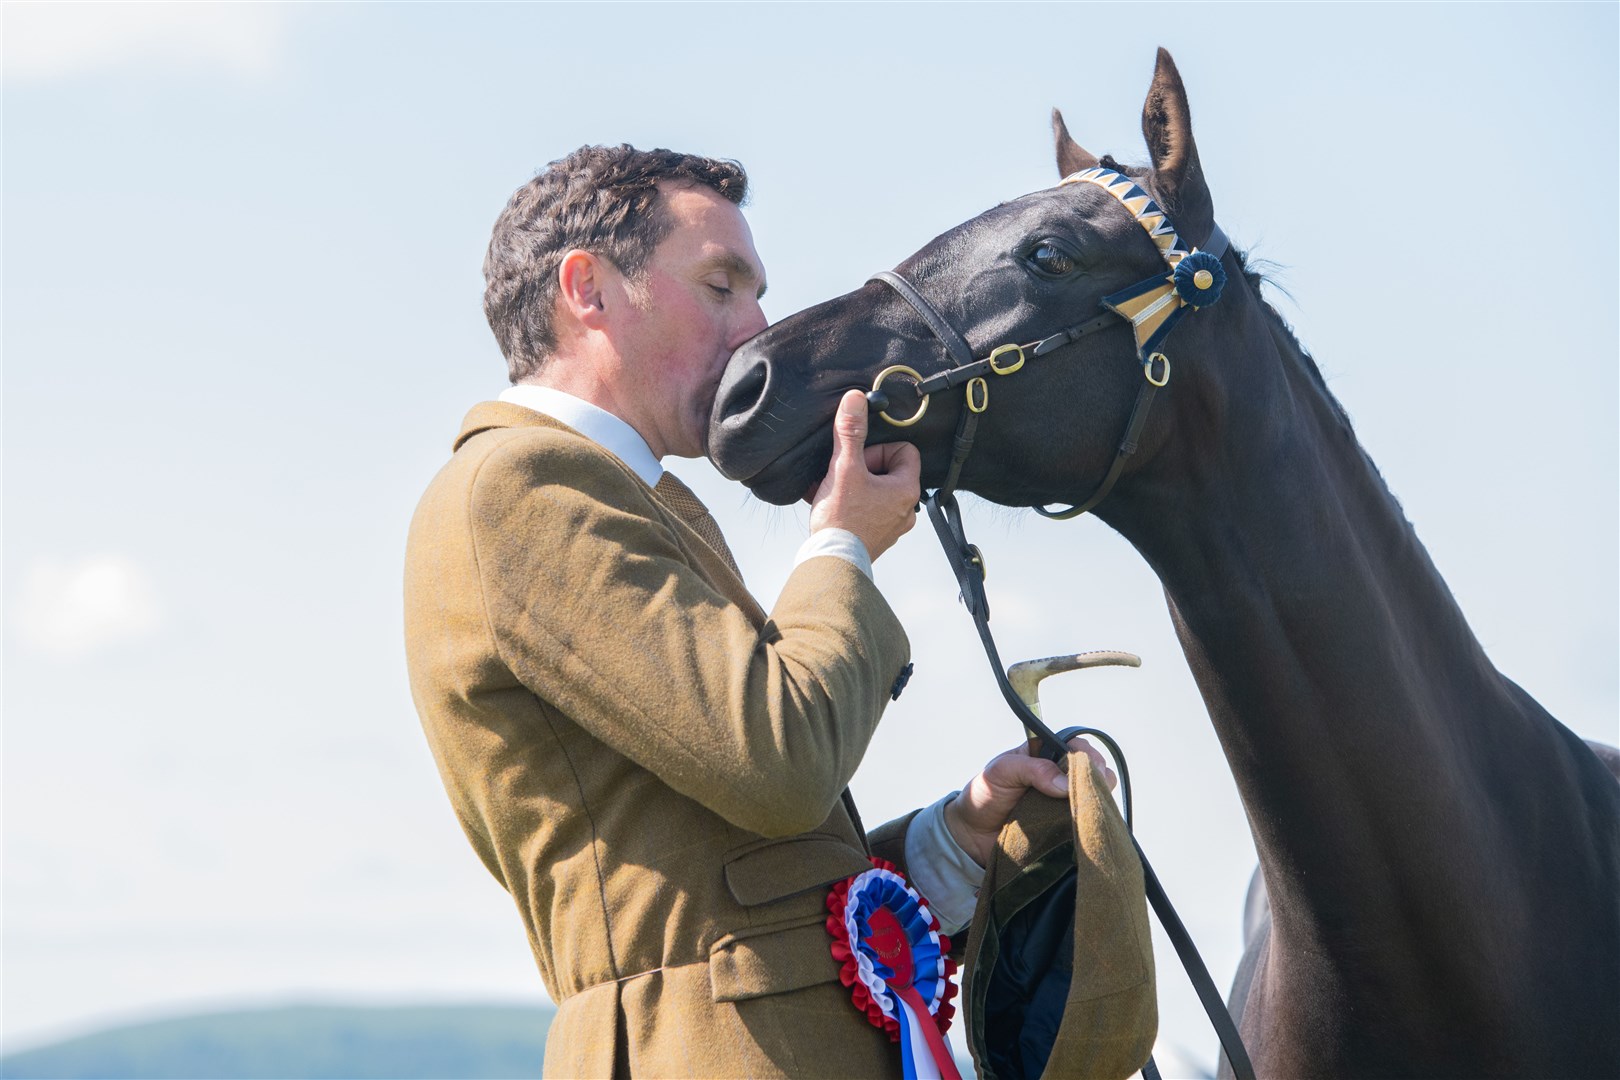 Tom Marshall kisses his overall champion horse. Picture: Daniel Forsyth